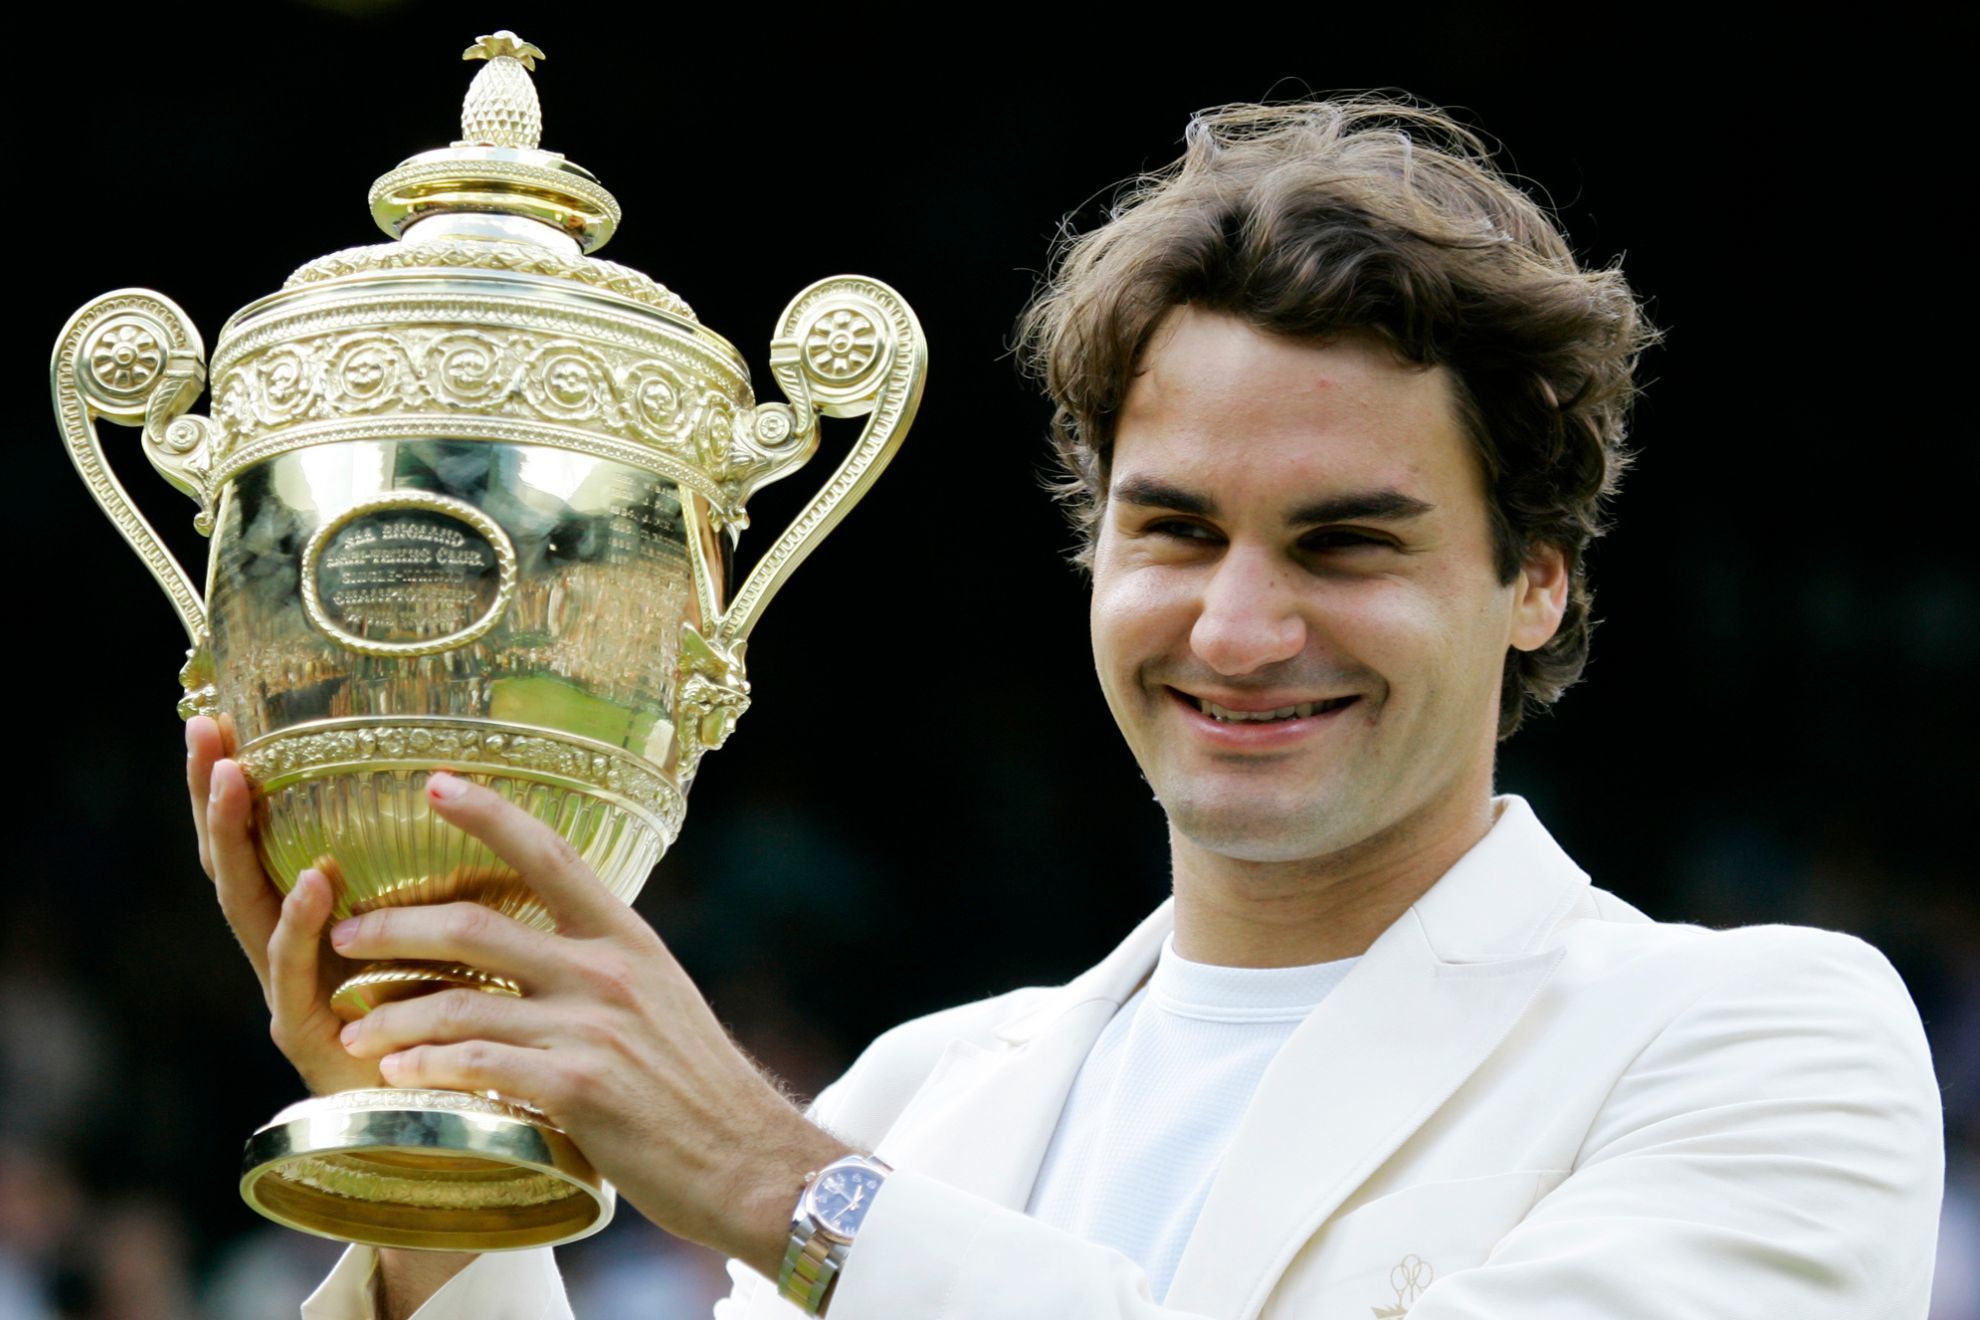 Roger Federer to take center stage at Wimbledon for one final goodbye